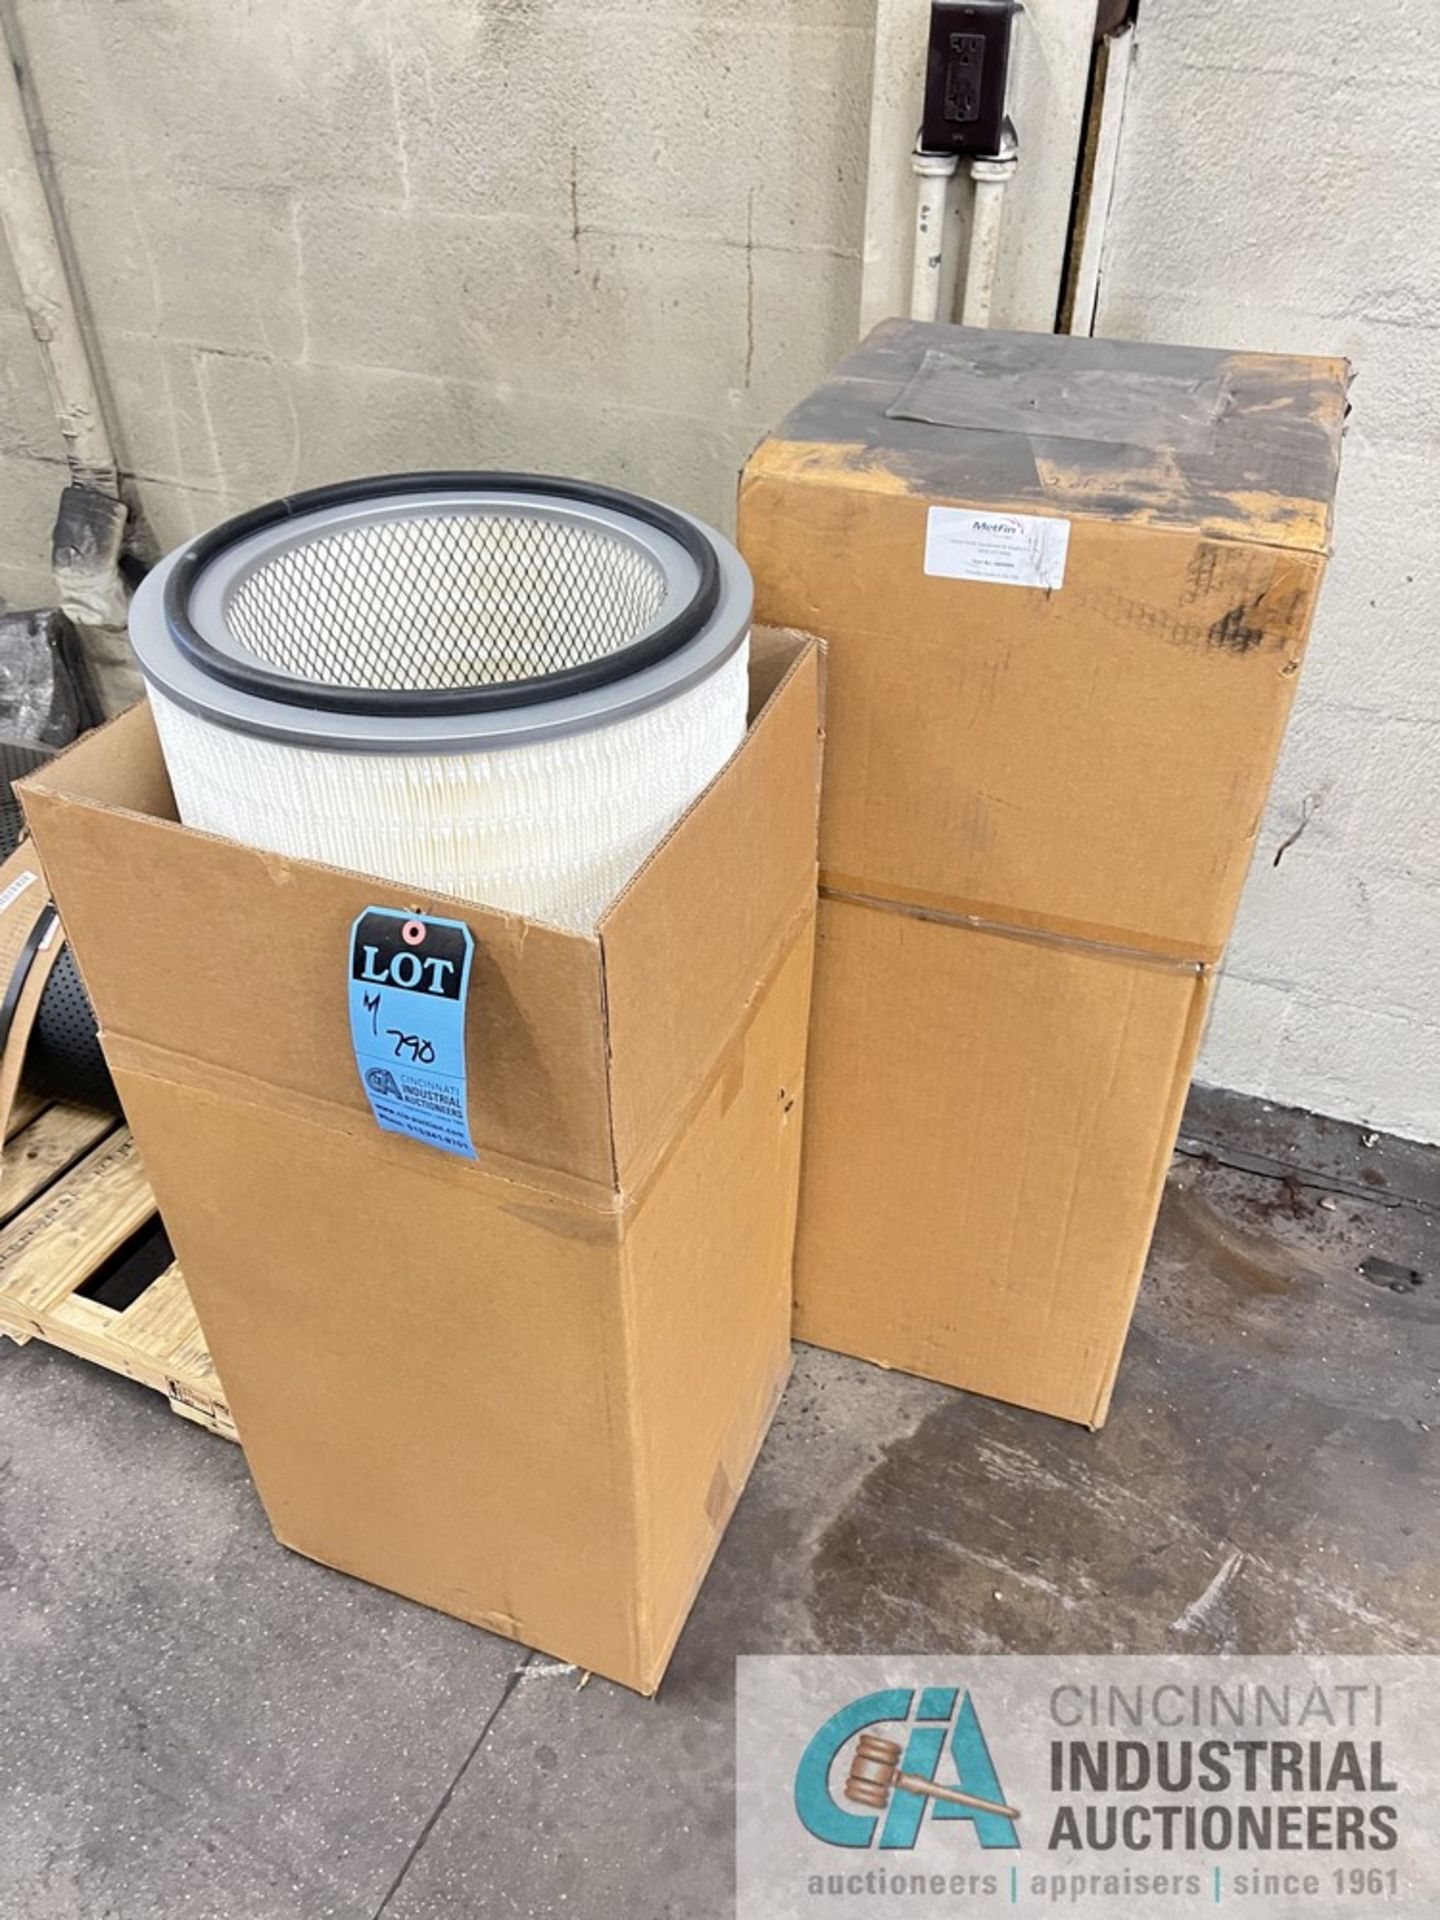 (LOT) 46" WIDE X 147" LONG METFIN RUBBER BELT AND (2) METFIN P/N 4800004 FILTERS (NEW) - Image 2 of 3